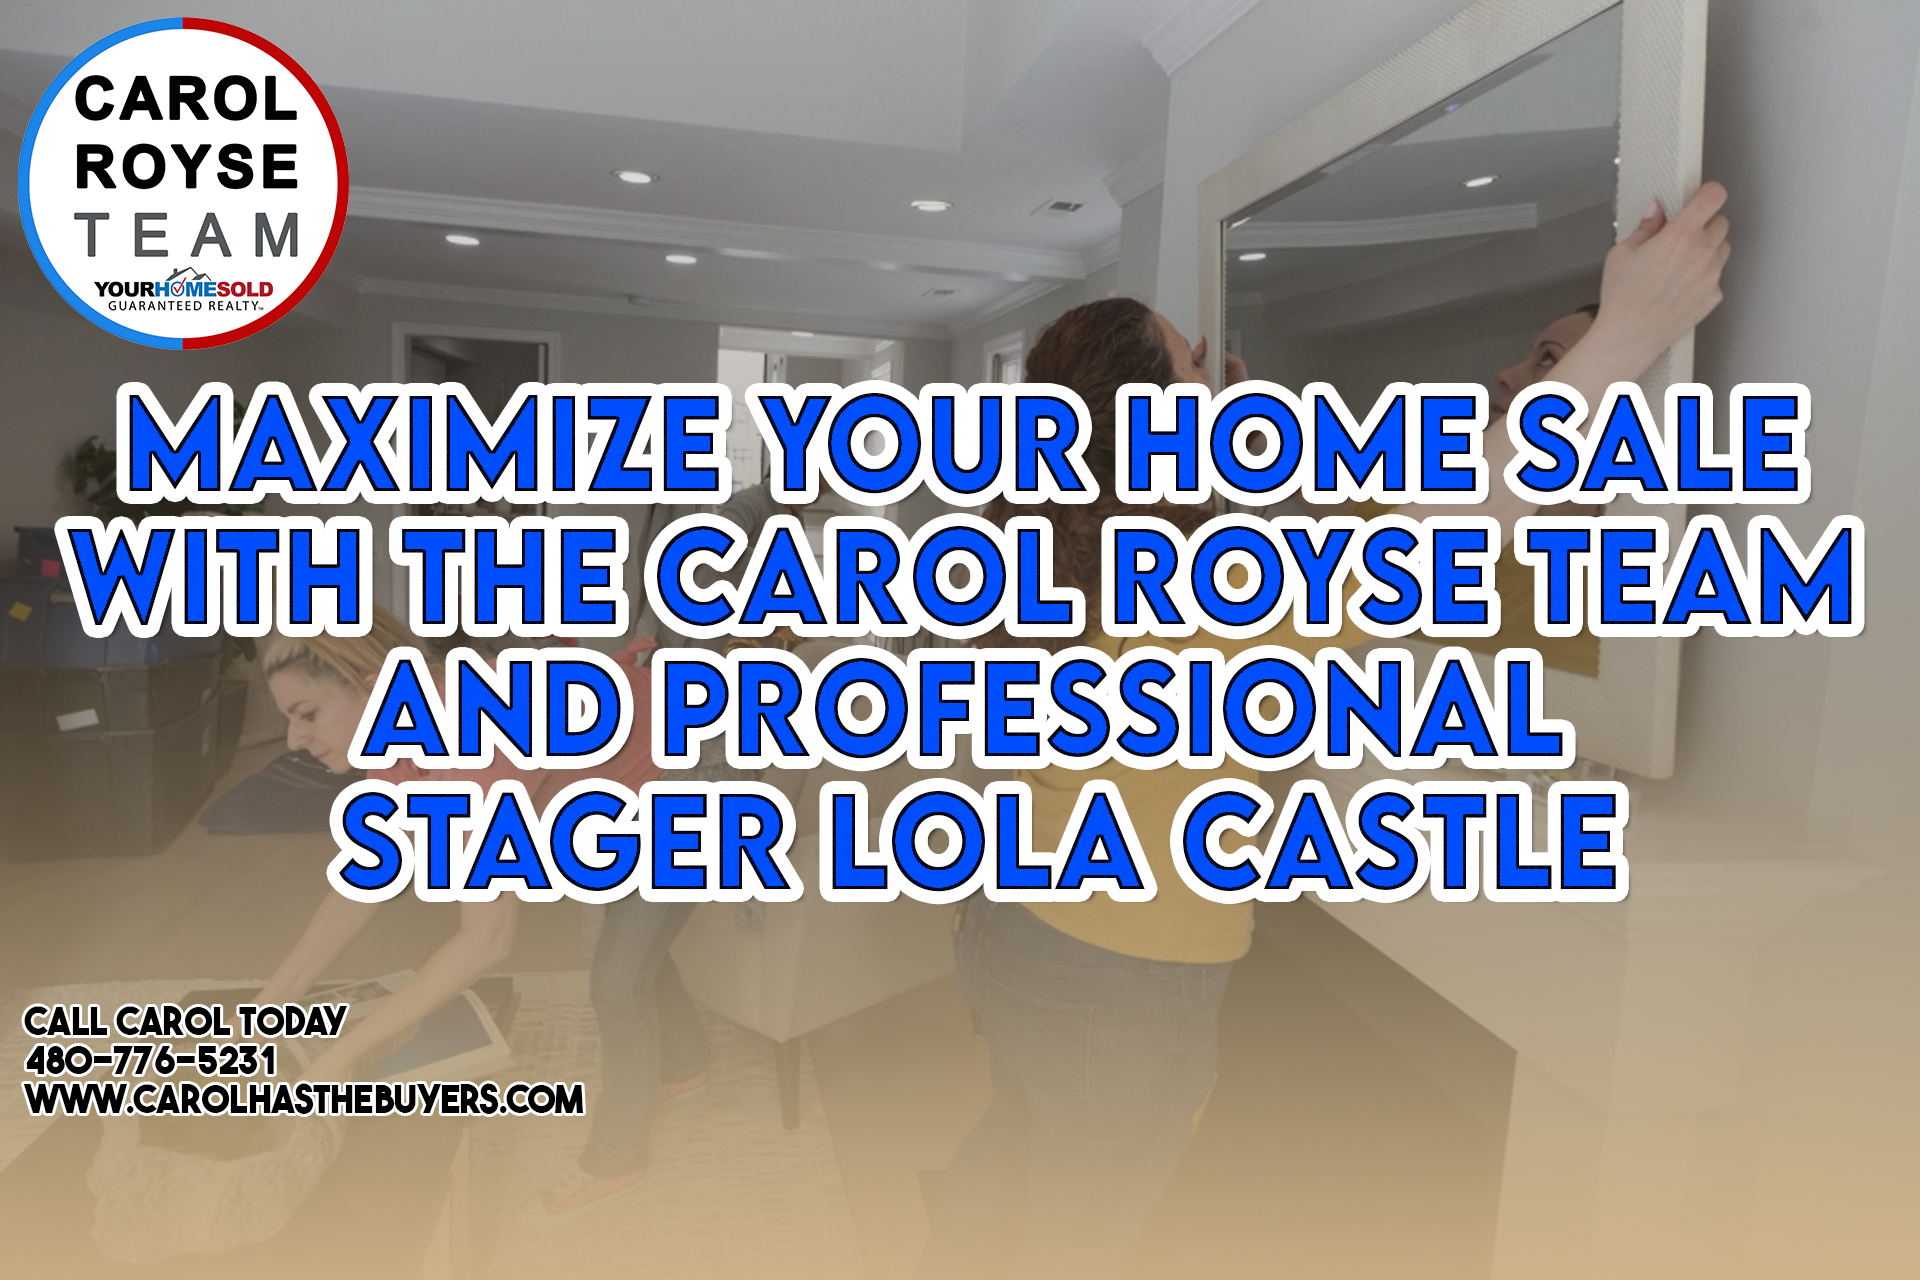 Maximize Your Home Sale with the Carol Royse Team and Professional Stager Lola Castle